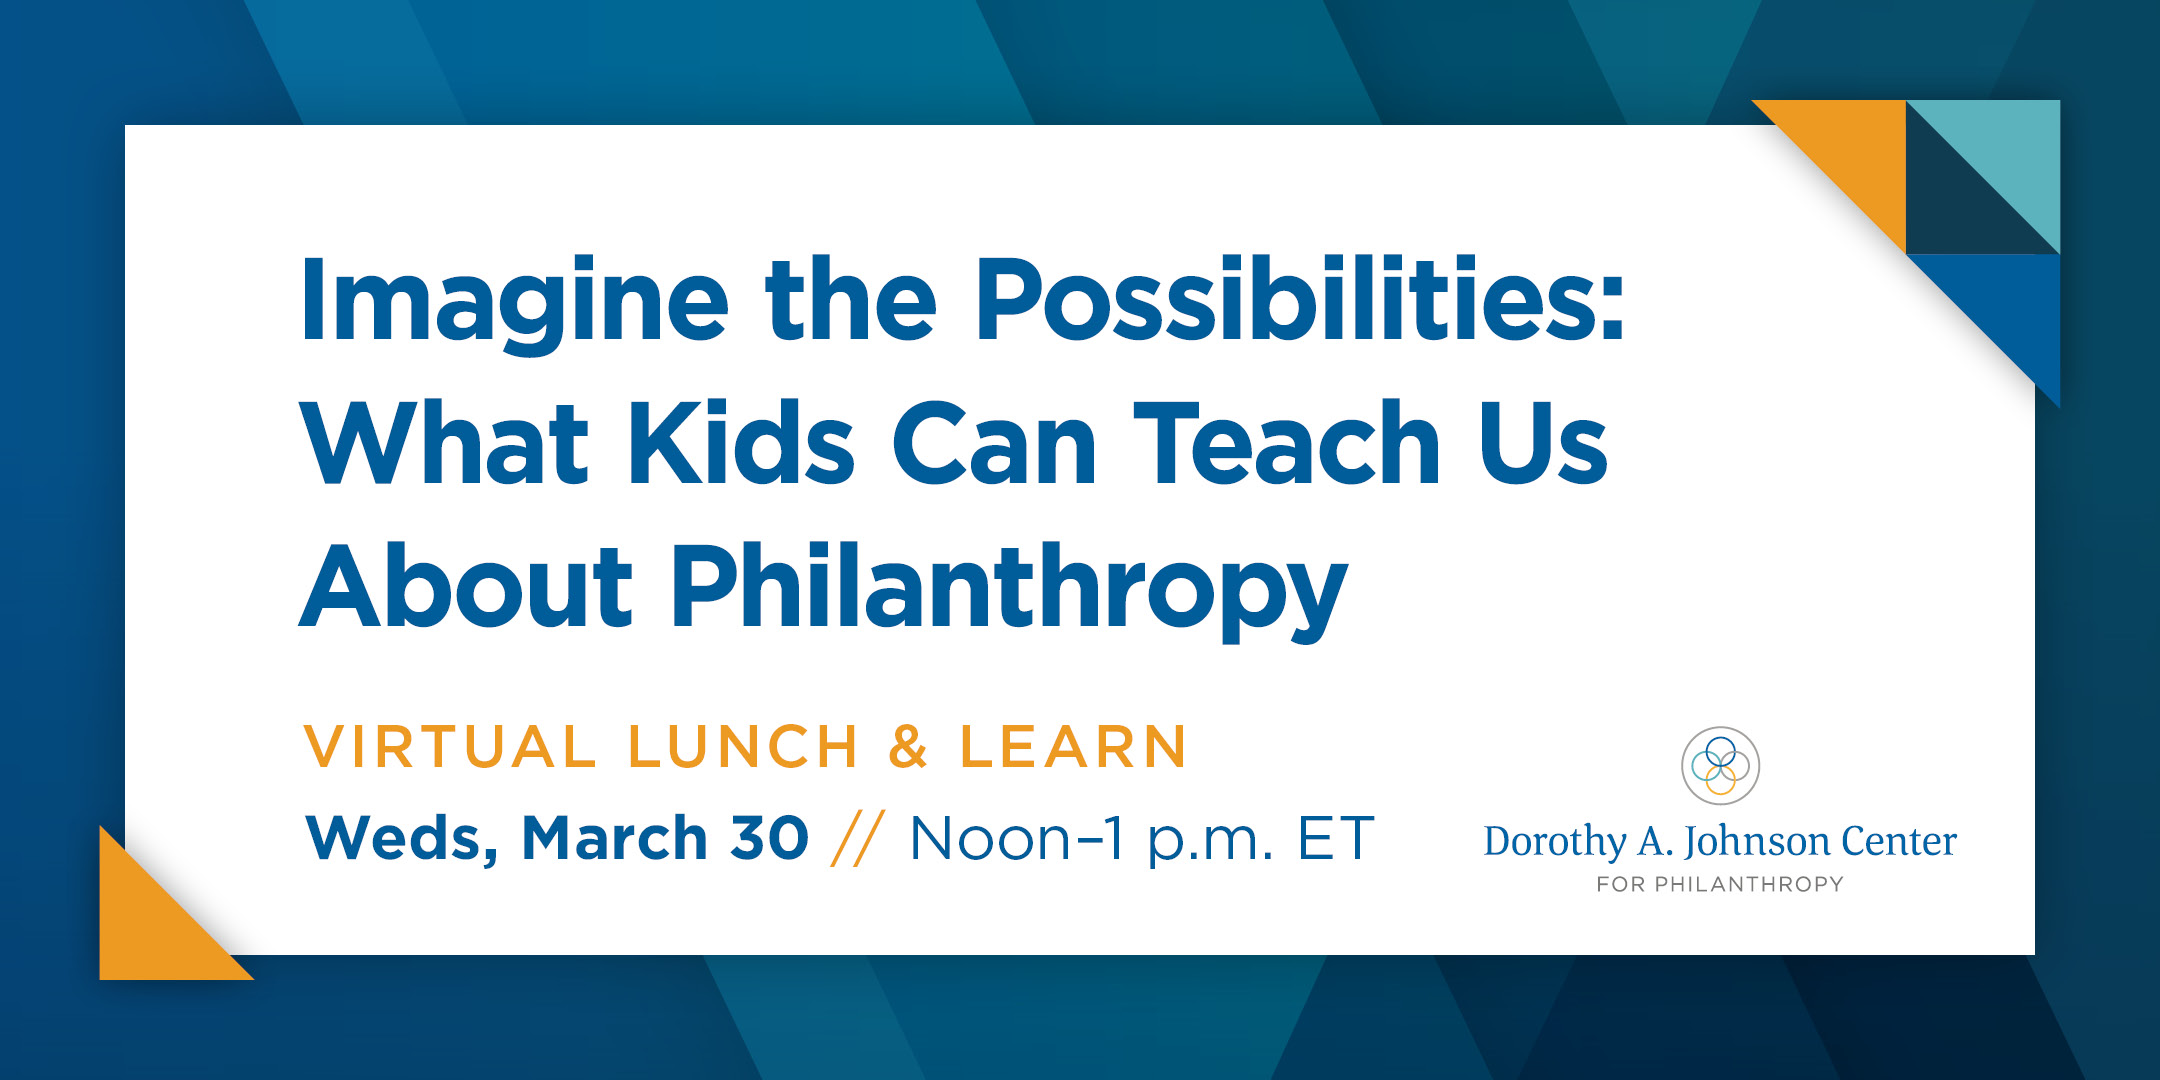 Imagine the Possibilities: What Kids Can Teach Us About Philanthropy